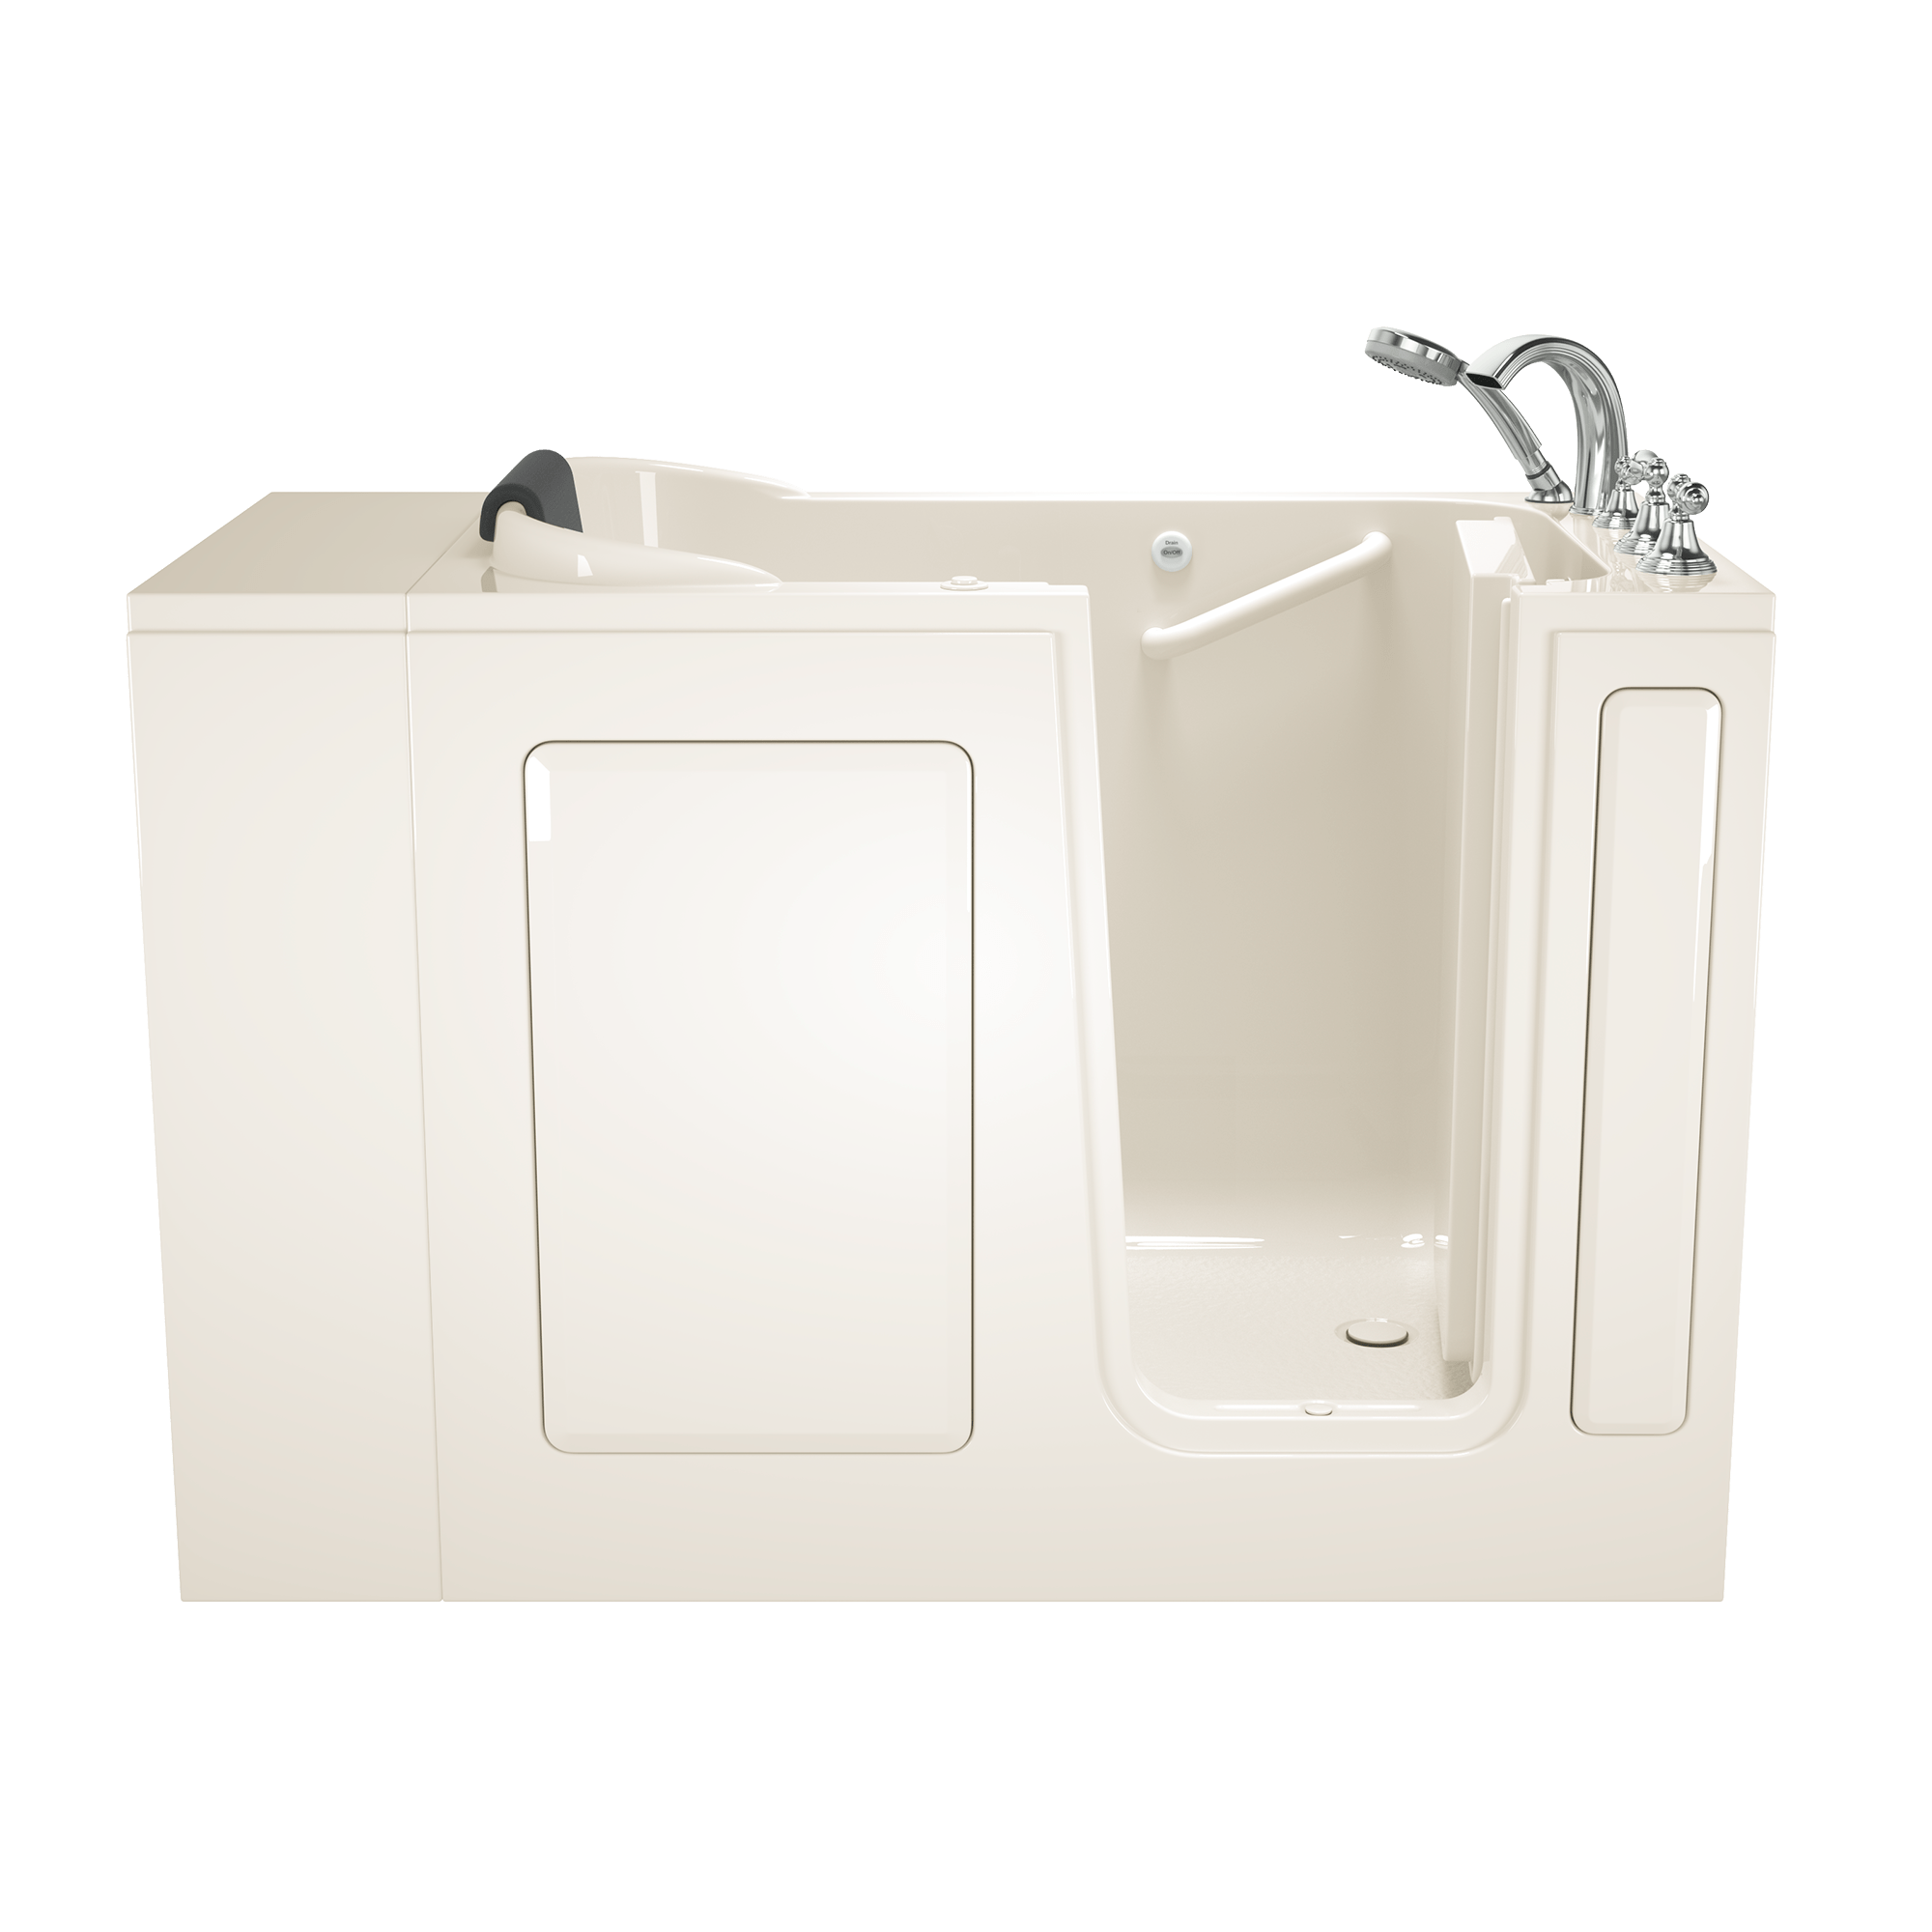 Gelcoat Premium Series 28 x 48 Inch Walk in Tub With Whirlpool System   Right Hand Drain With Faucet WIB LINEN